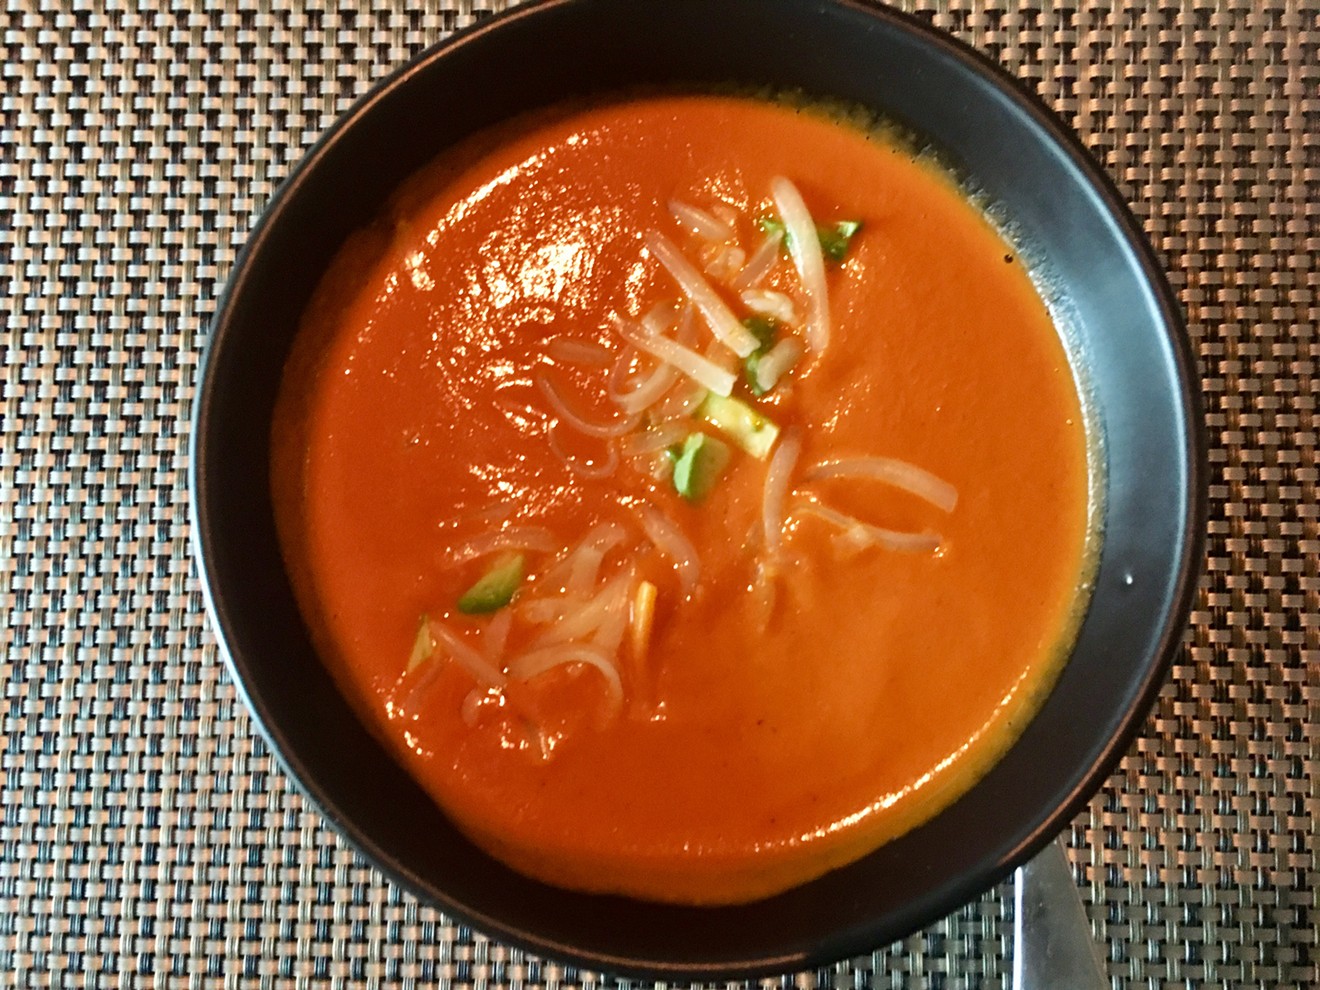 A bolt of white cheddar and avocado top the roasted tomato soup at Knife (cup for $6; bowl for $12).